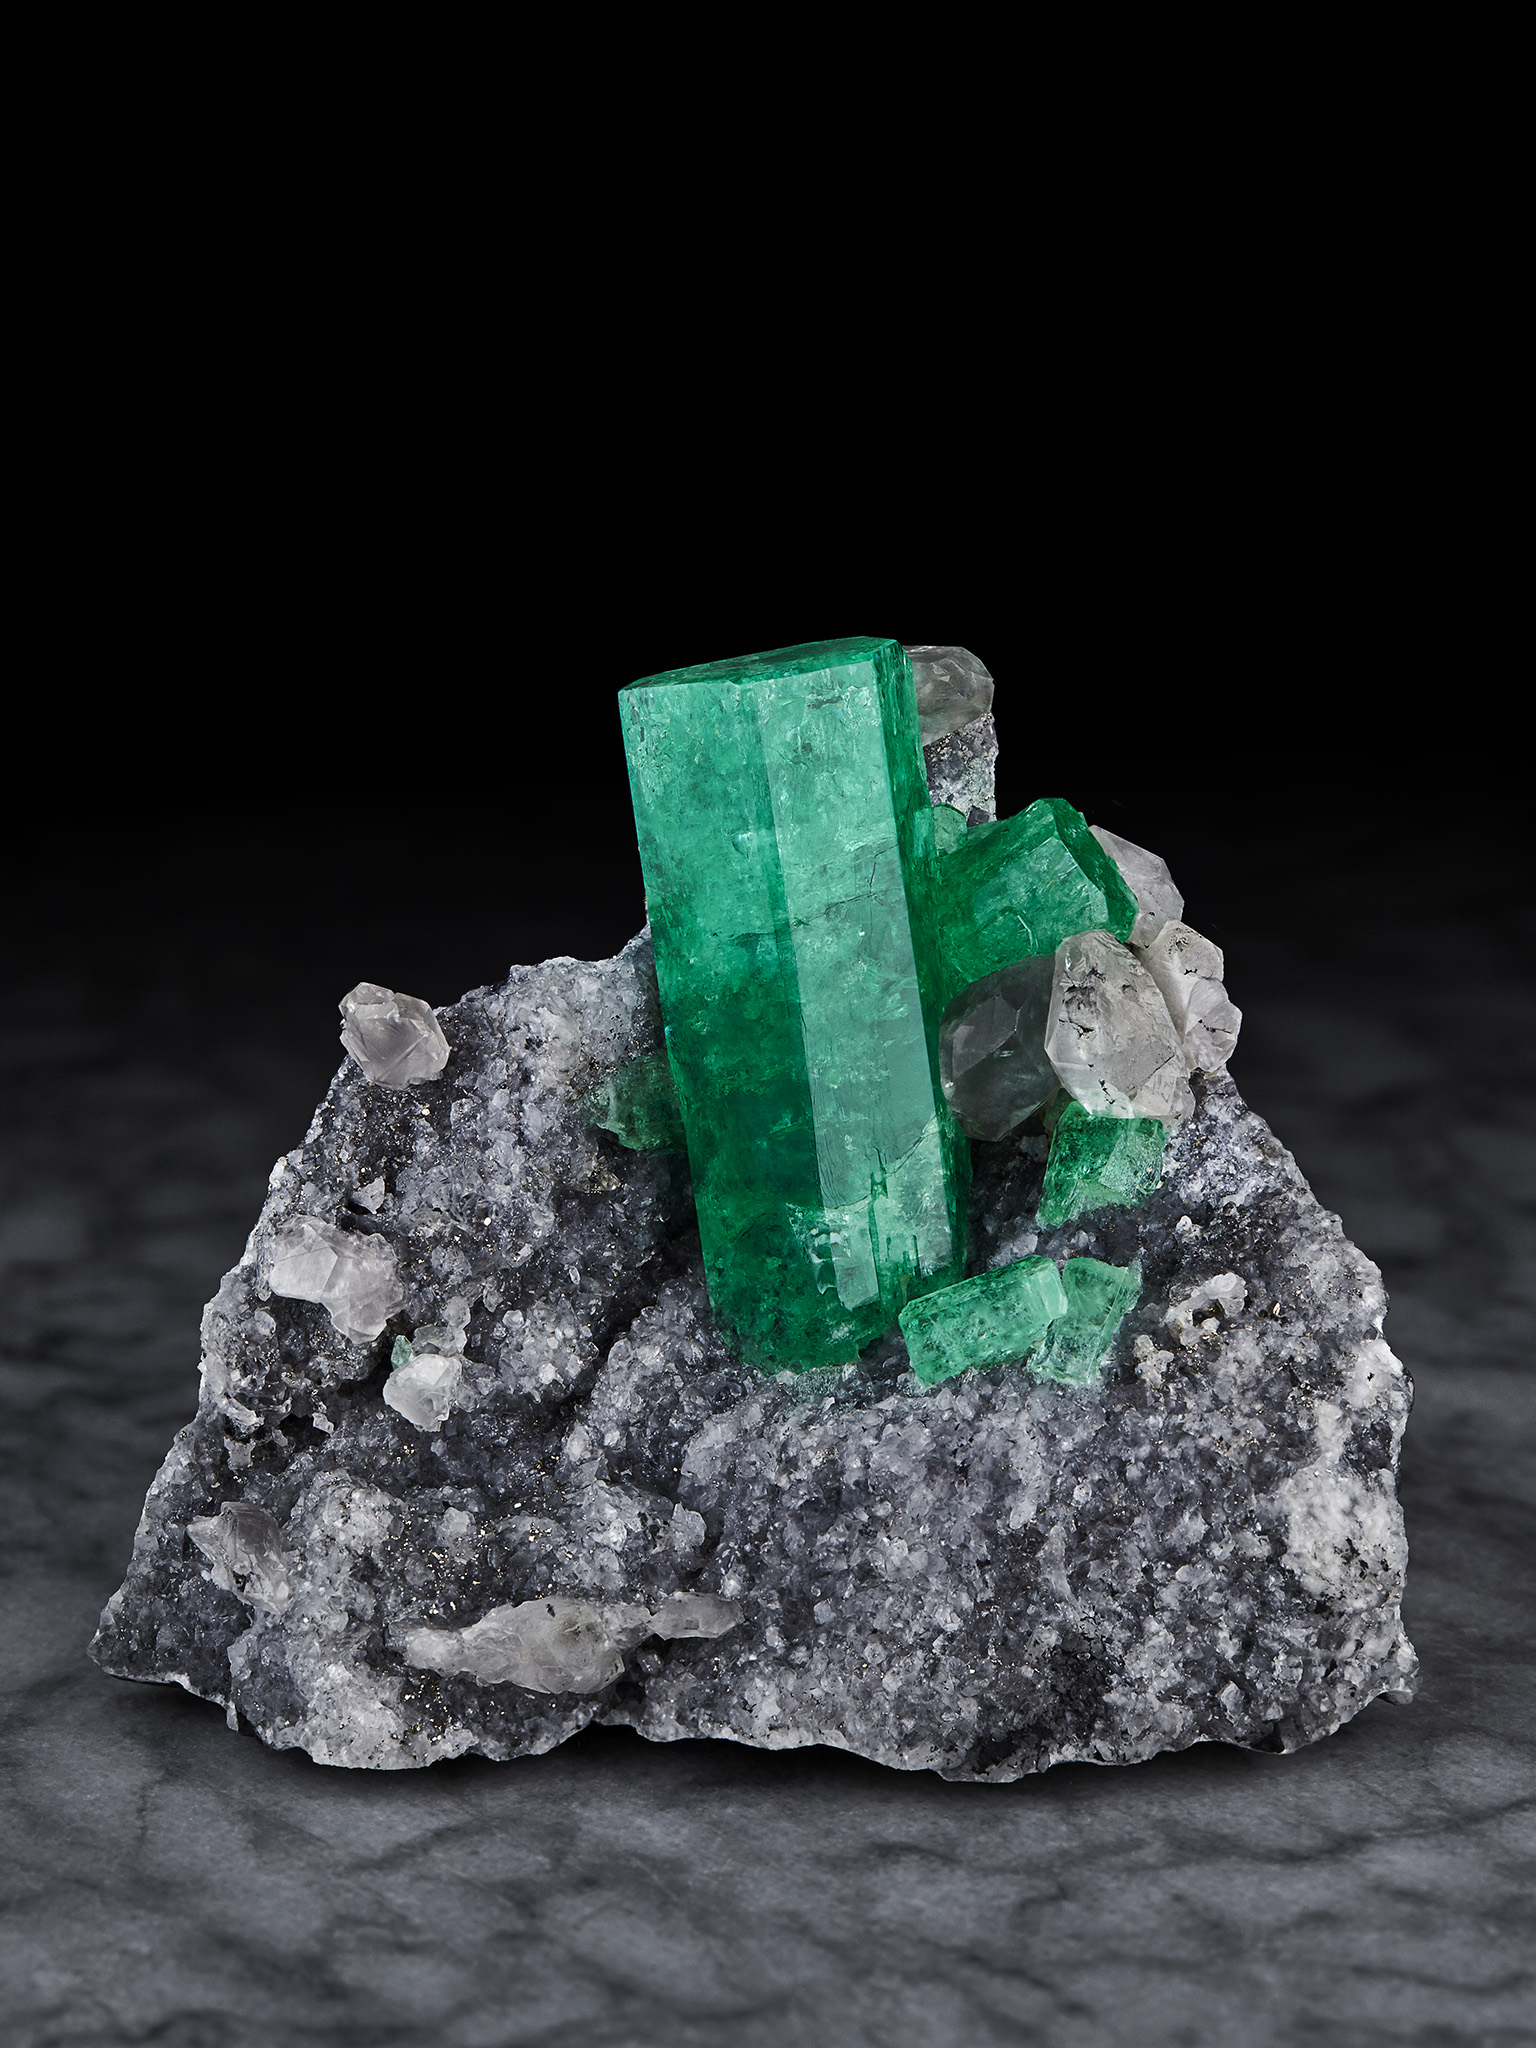 Emerald on Calcite, from the Coscuez Mine, Boyaca, Columbia. Dr. Stephen Smale Collection. Image by Evan D'Arpino.